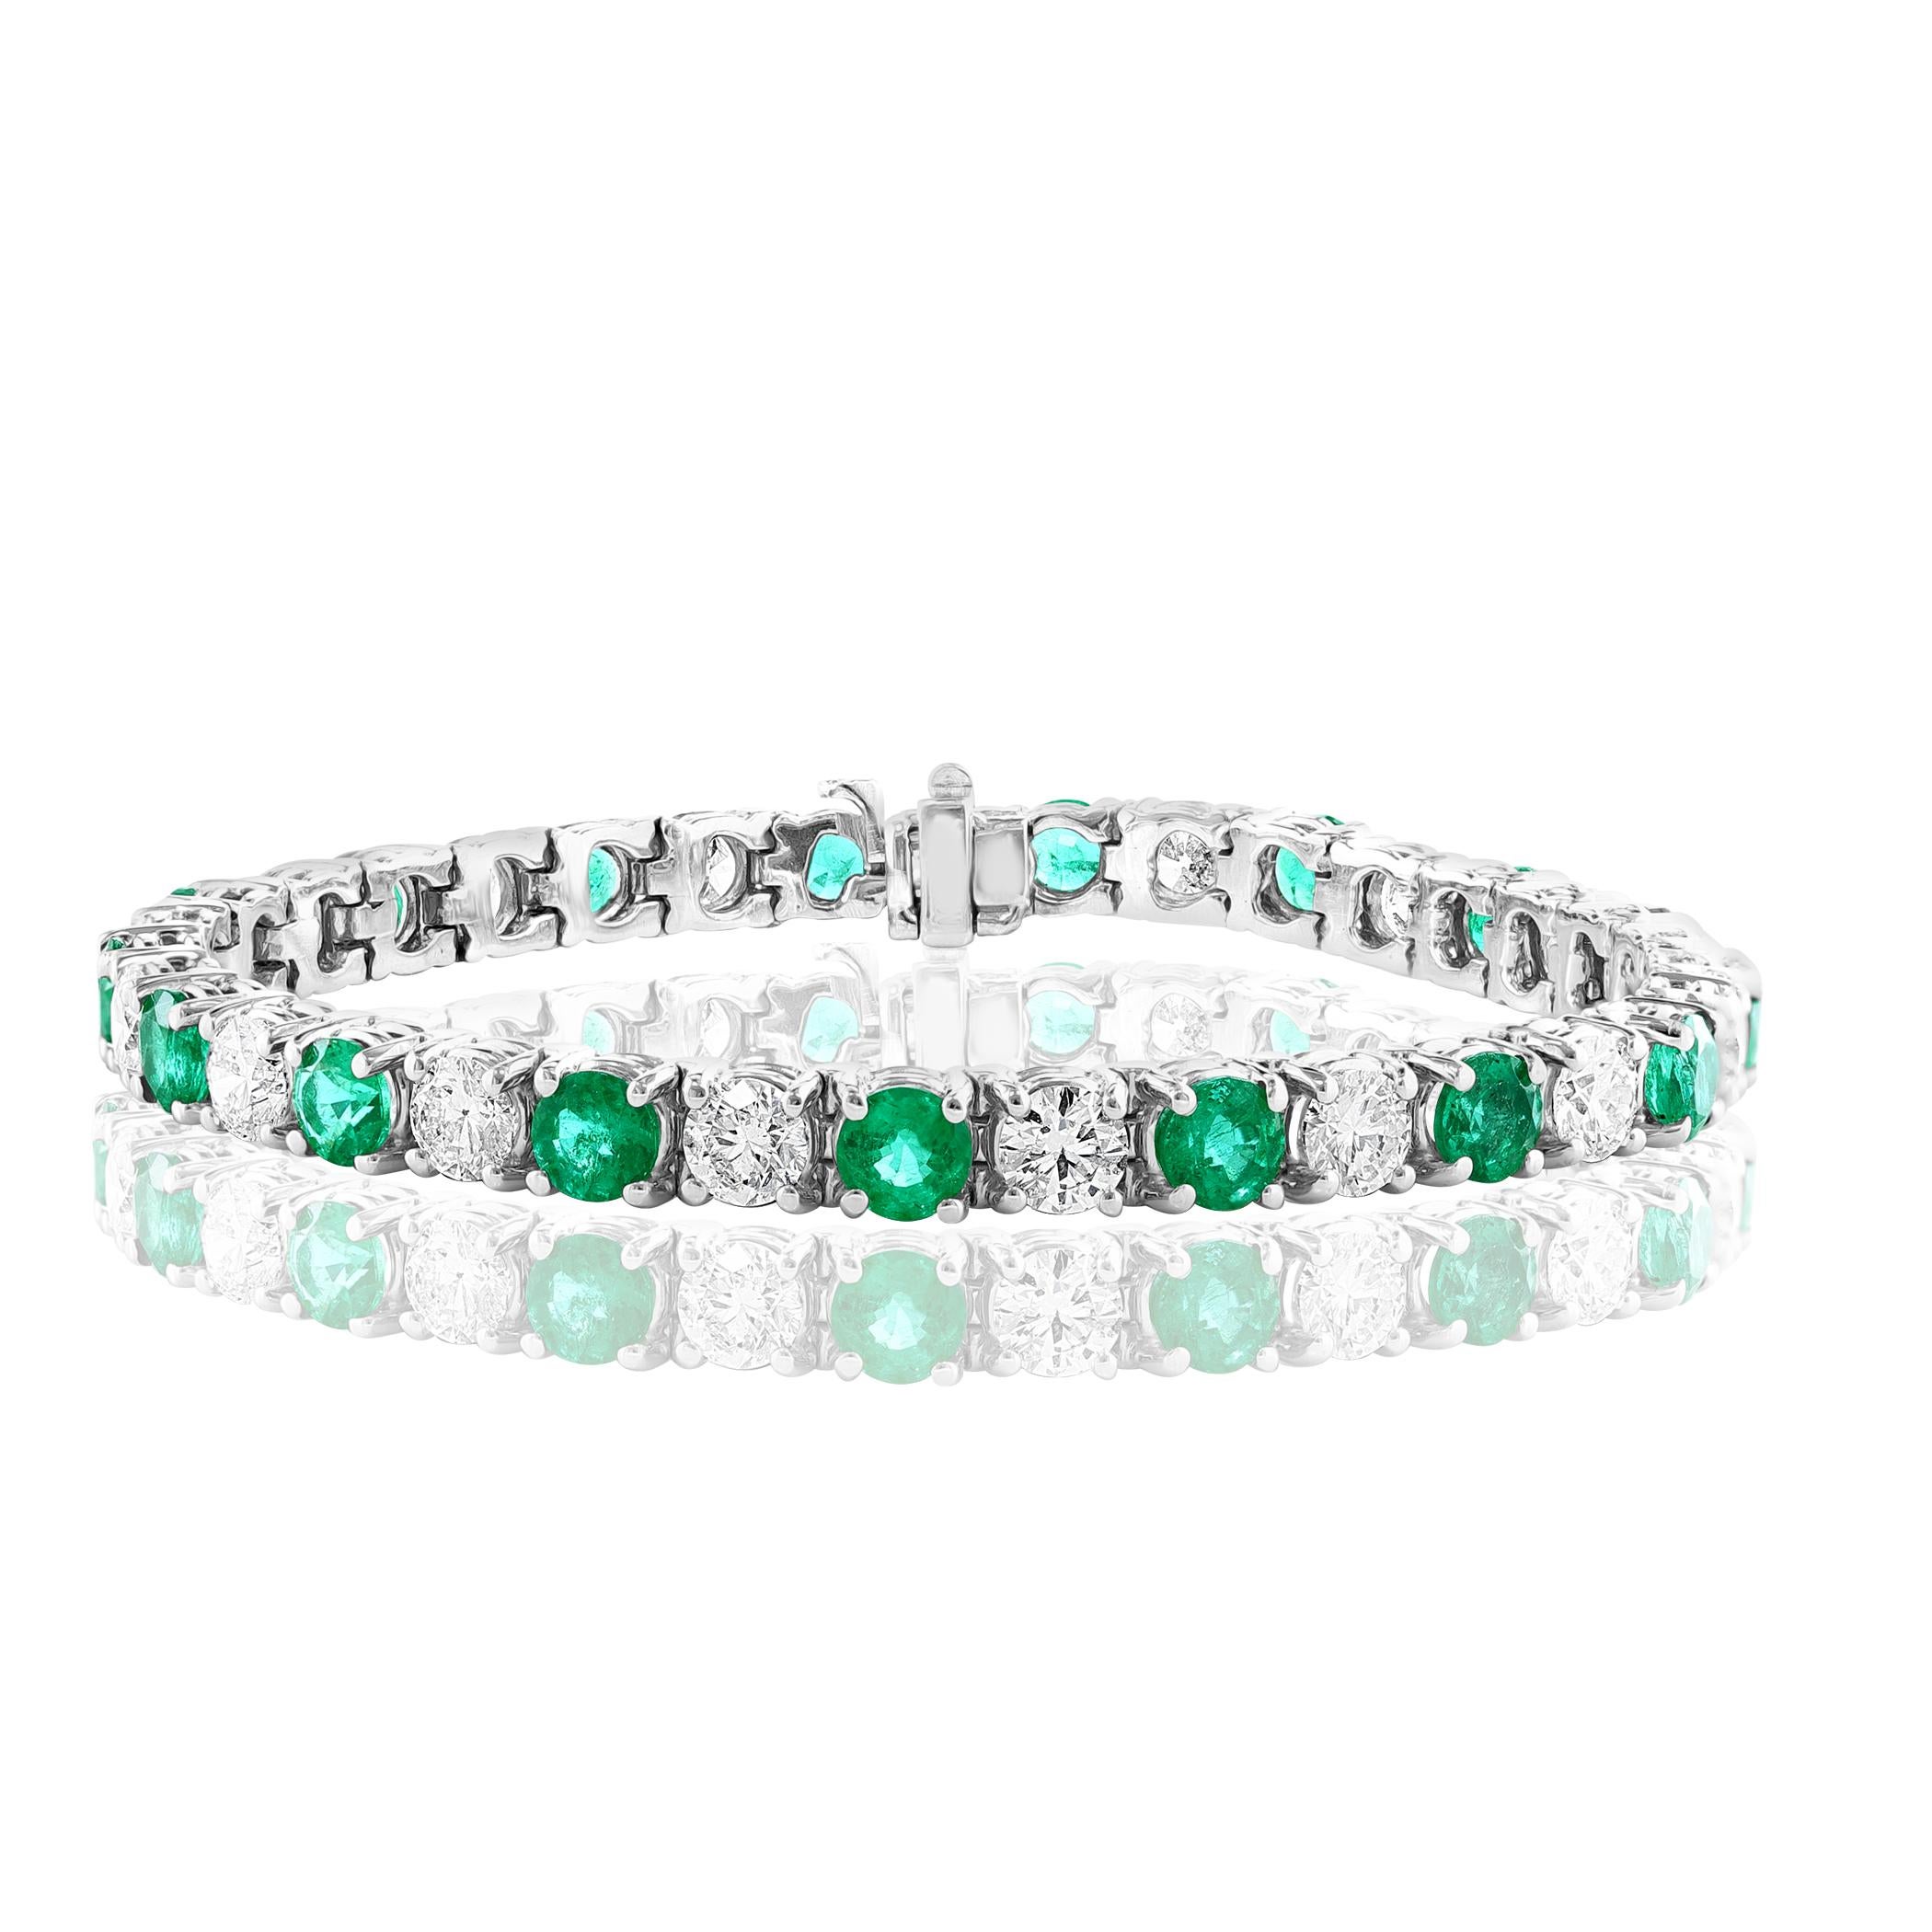 Showcasing 7.48 carats total of 17 lush green emeralds, elegantly alternating with 7 carats of 17 round brilliant diamonds. Made in 14 karat white gold.

Style available in different price ranges. Prices are based on your selection of the 4C’s